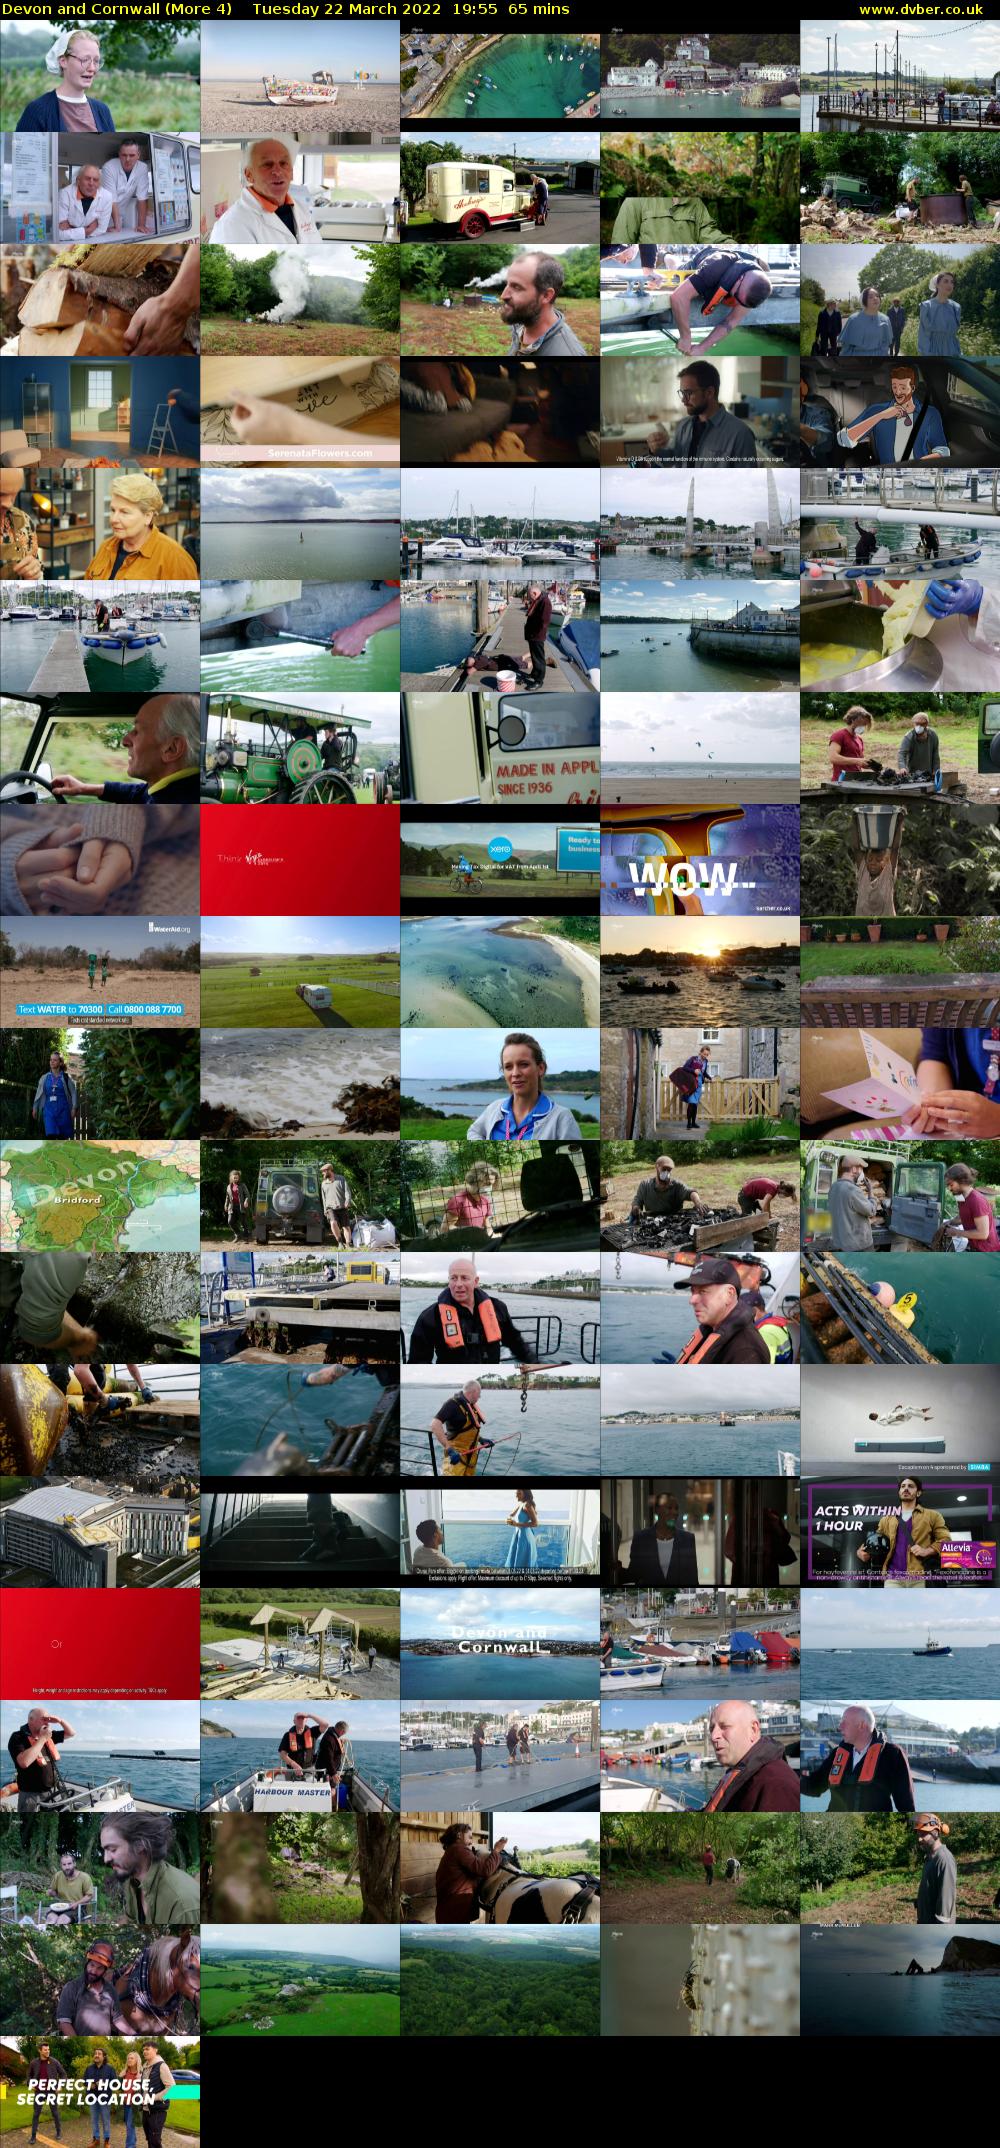 Devon and Cornwall (More 4) Tuesday 22 March 2022 19:55 - 21:00